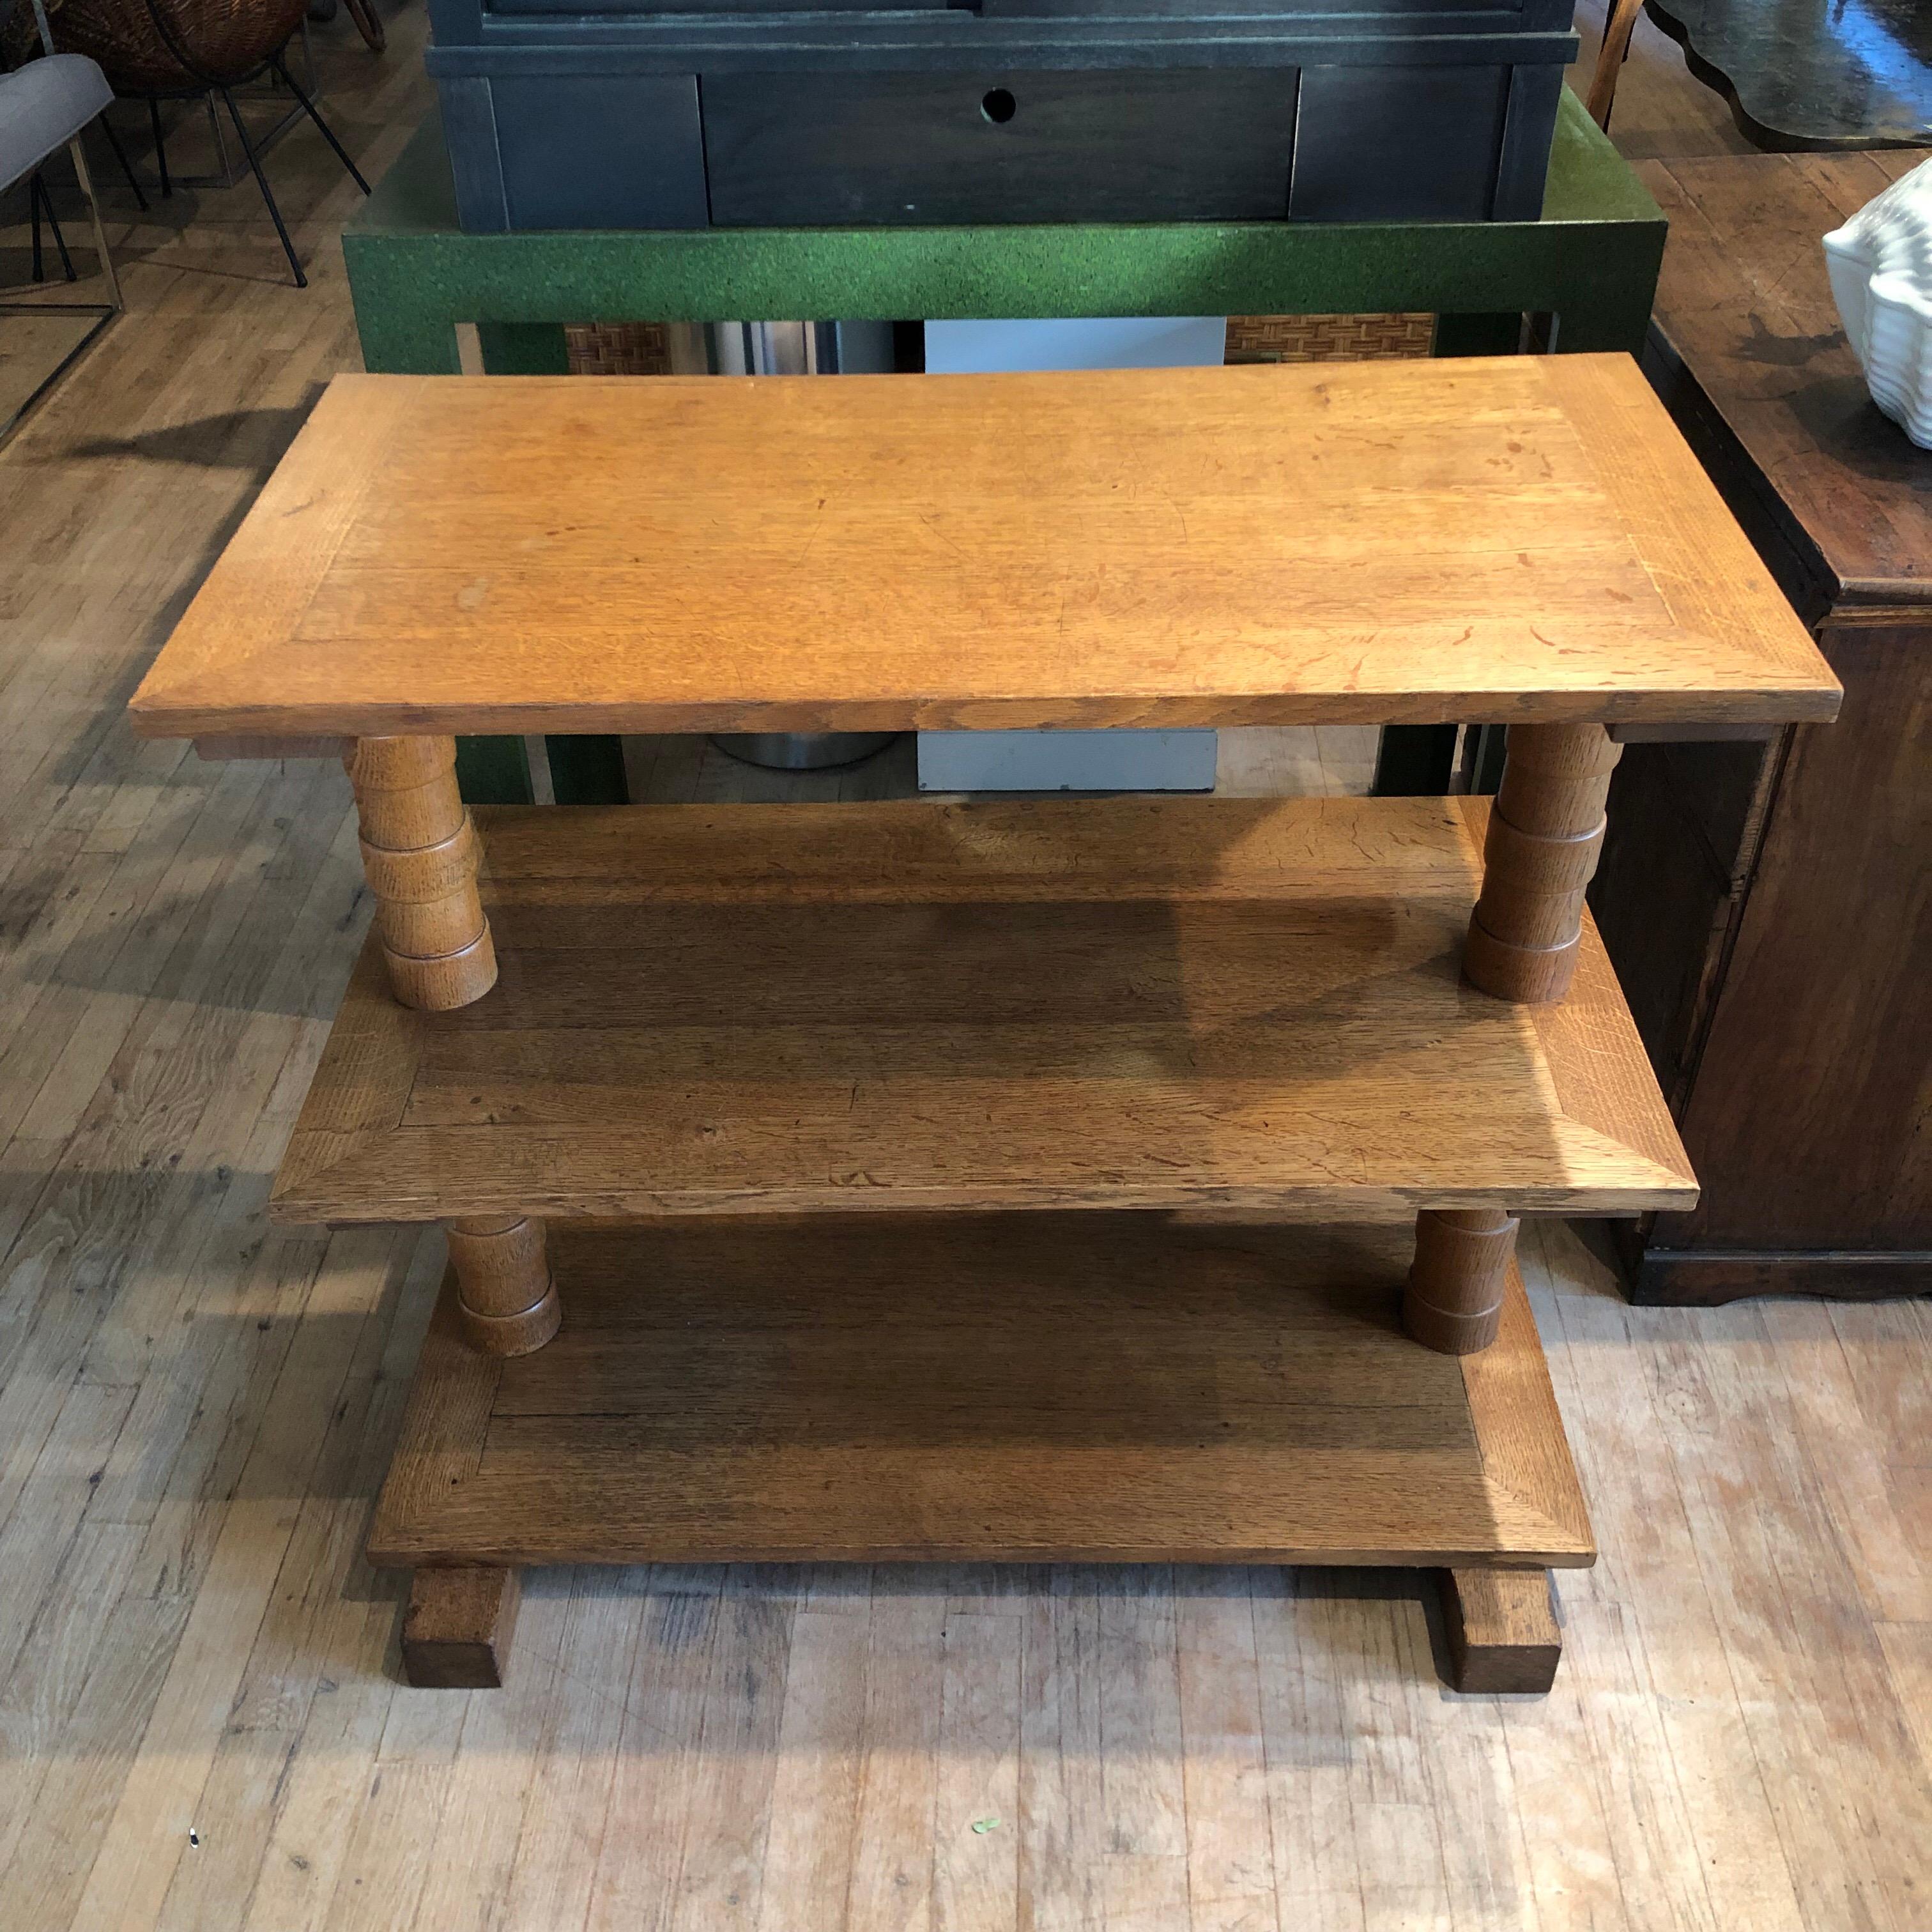 1940s French oak 3 tiered side table / console.